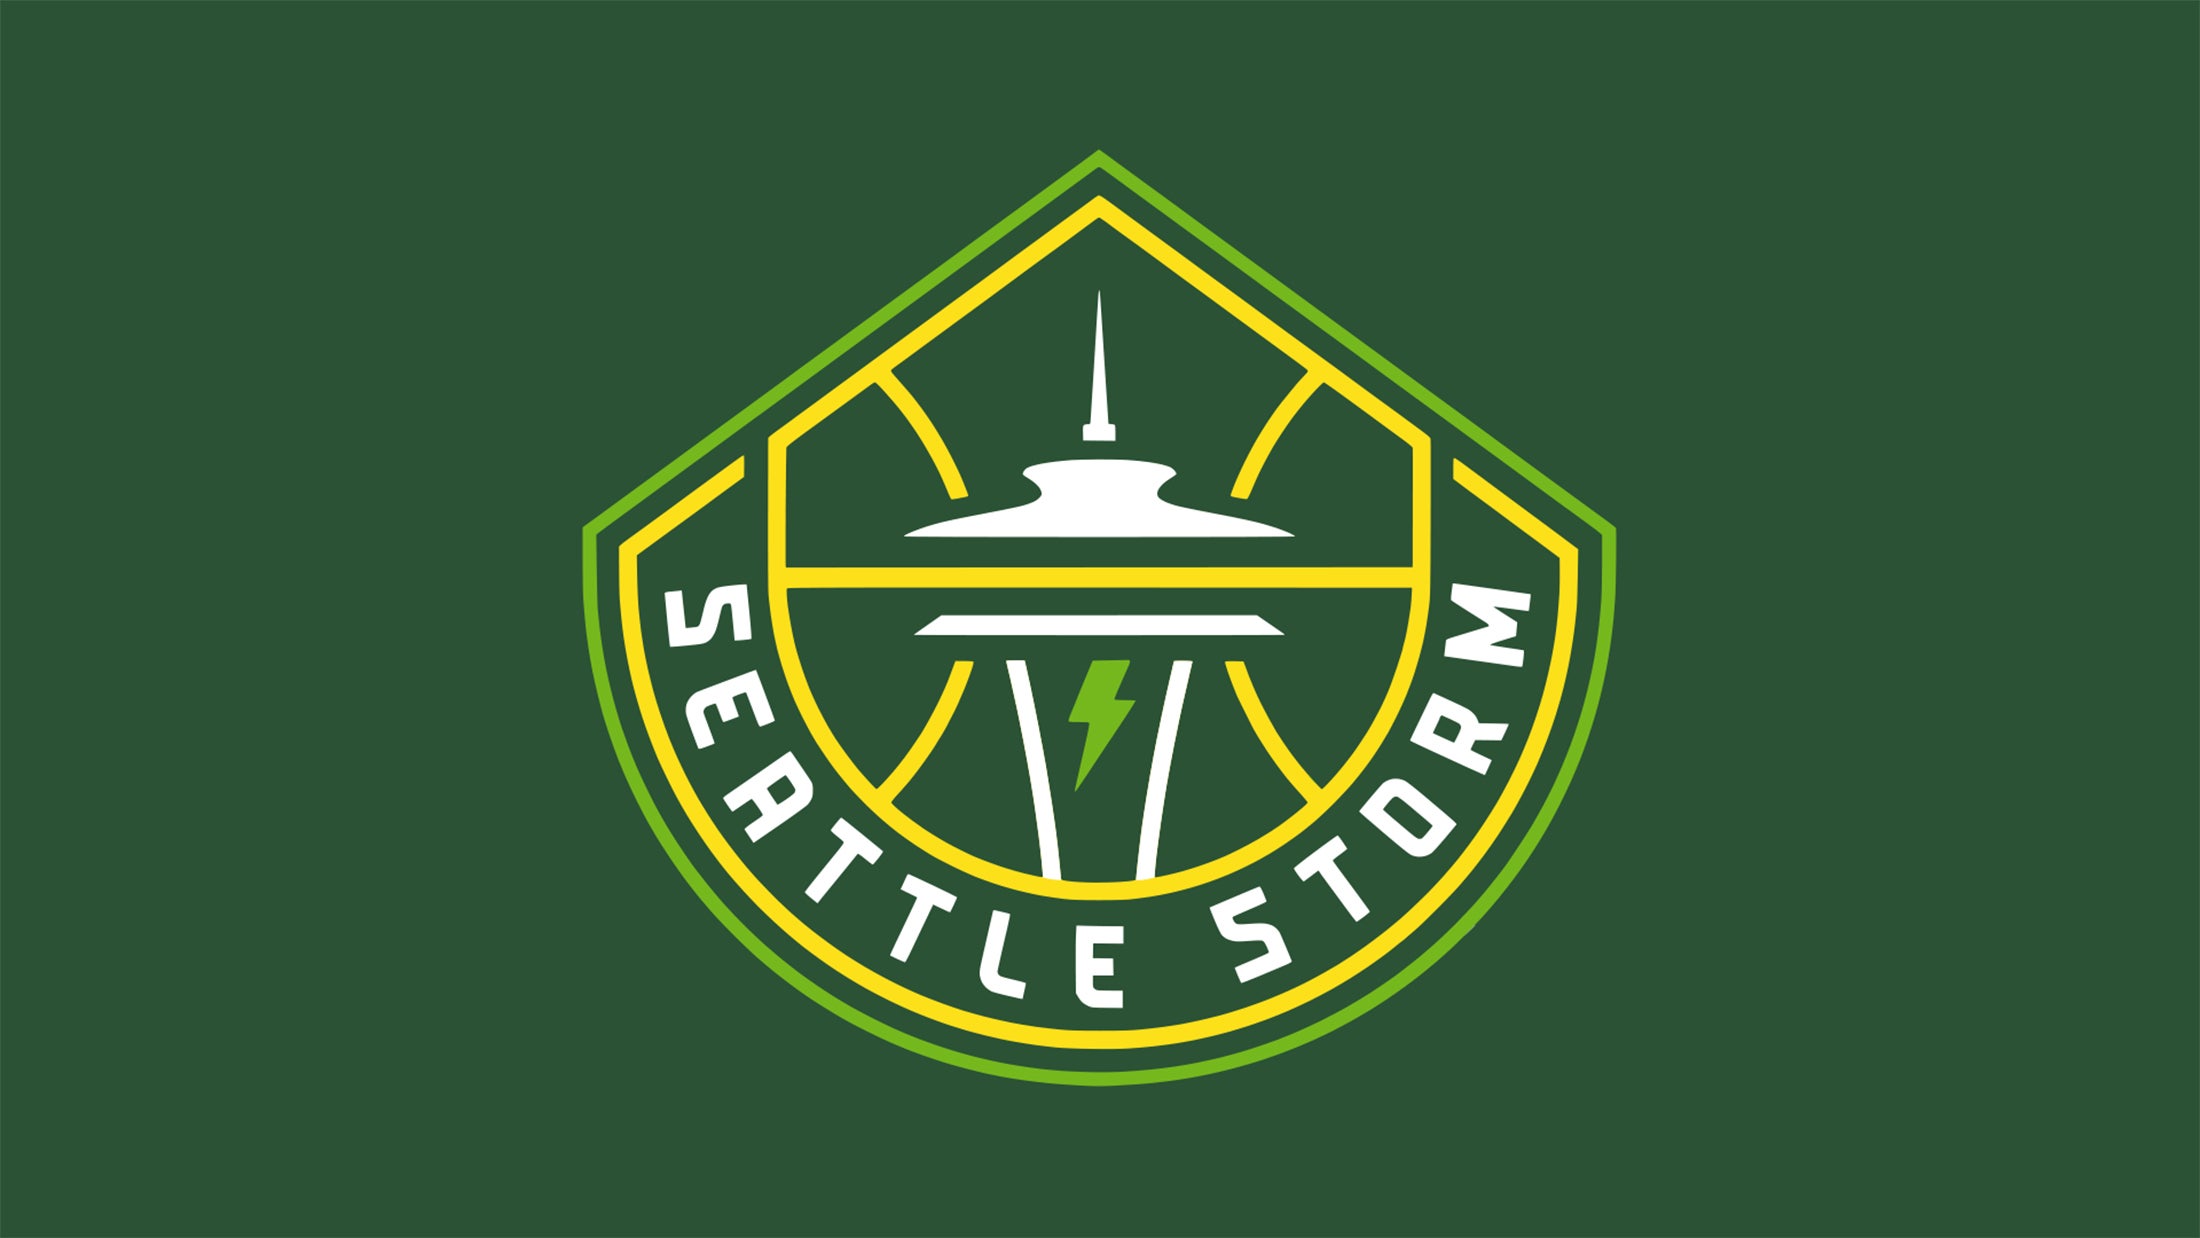 Seattle Storm vs. Chicago Sky in Seattle promo photo for Climate Pledge Arena presale offer code